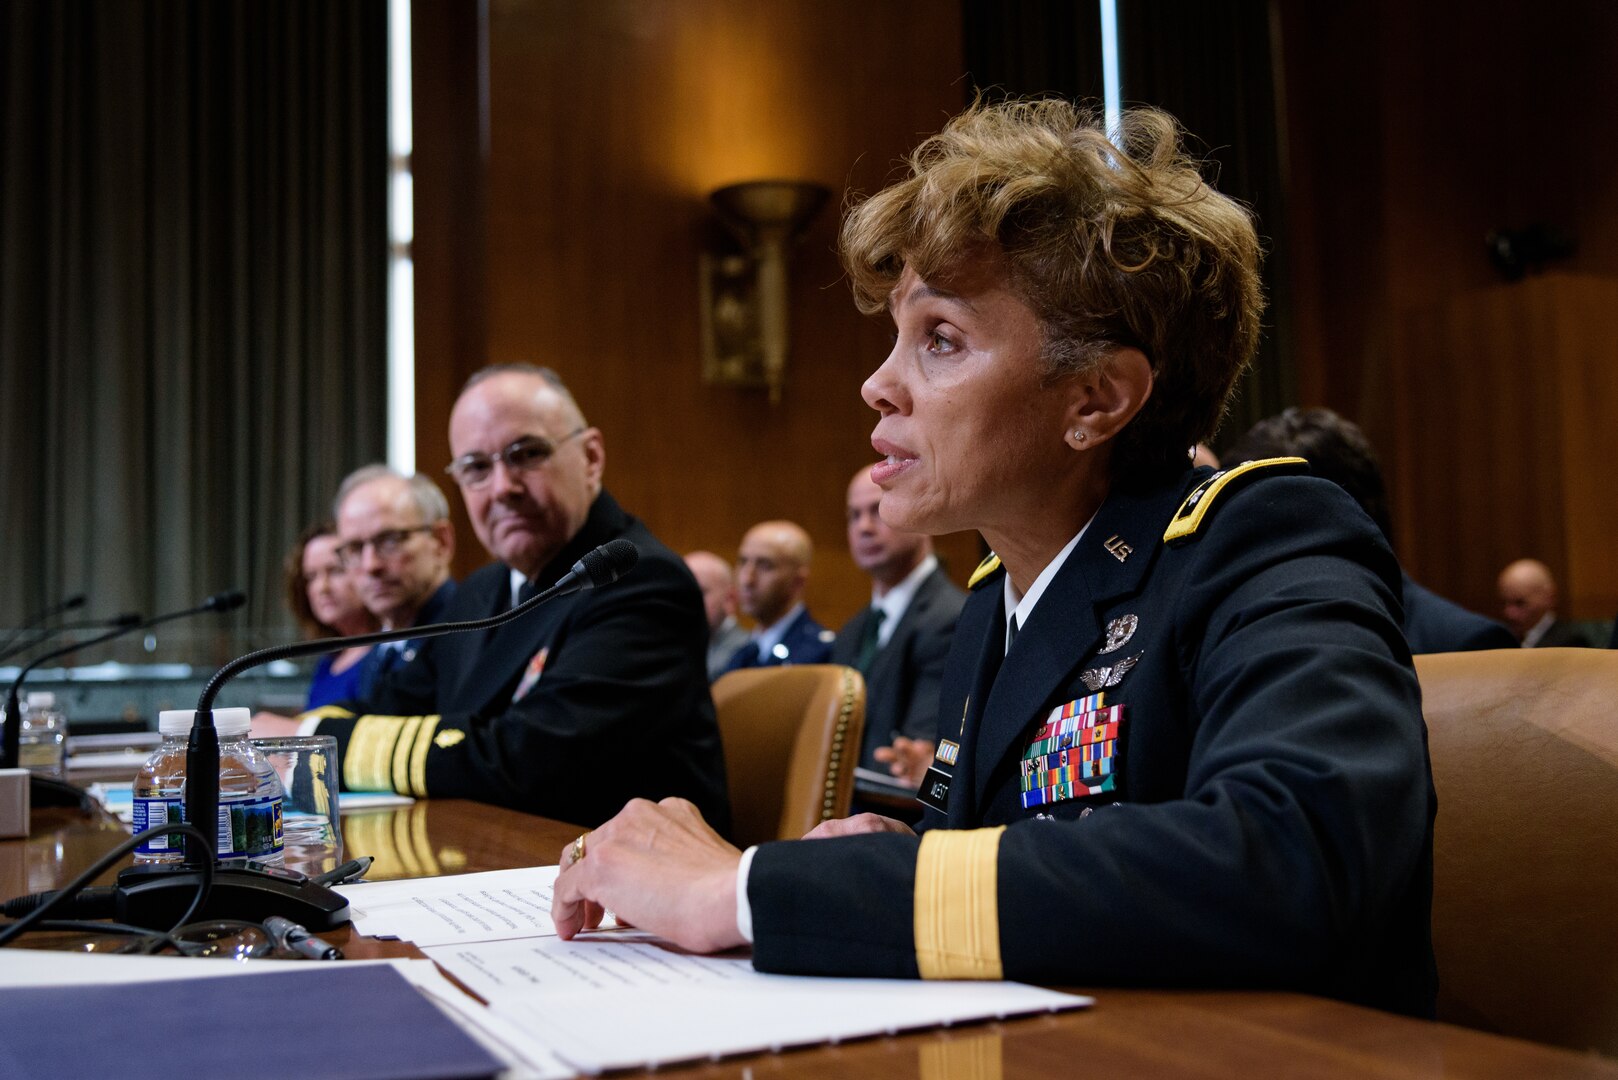 Lt. Gen. Nadja Y. West, the Army Surgeon General and commanding general for Army Medical Command, addressed the Army's fiscal year 2019 funding request and budget justification before the U.S. Senate Committee on Appropriations on Capitol Hill, April 26.